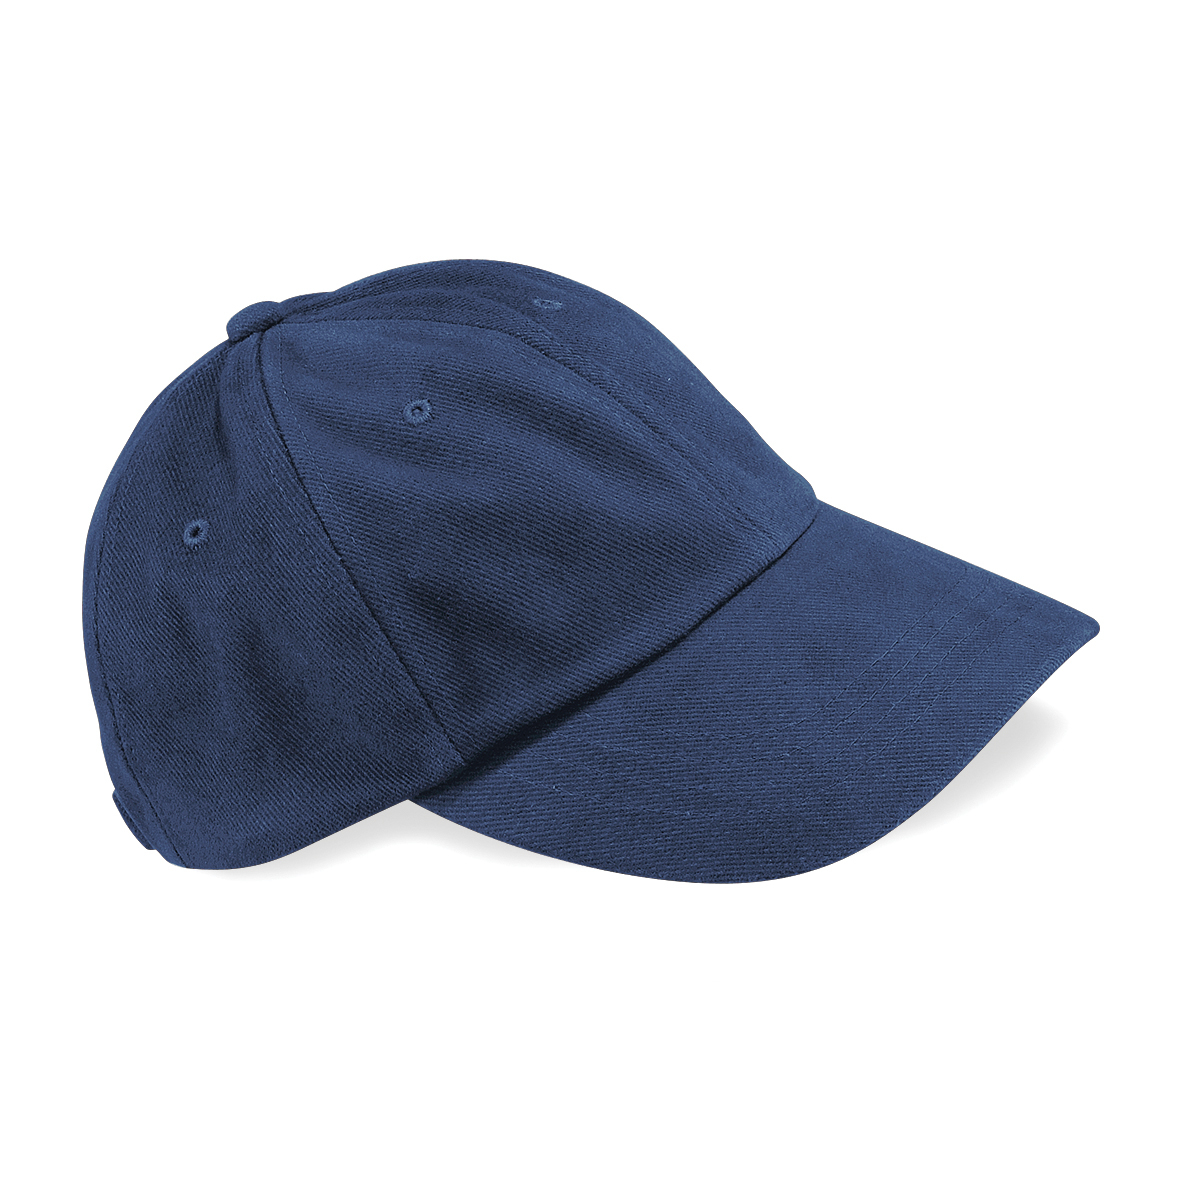 Low Profile Heavy Brushed Cotton Cap in navy with navy visor, eyelets and button